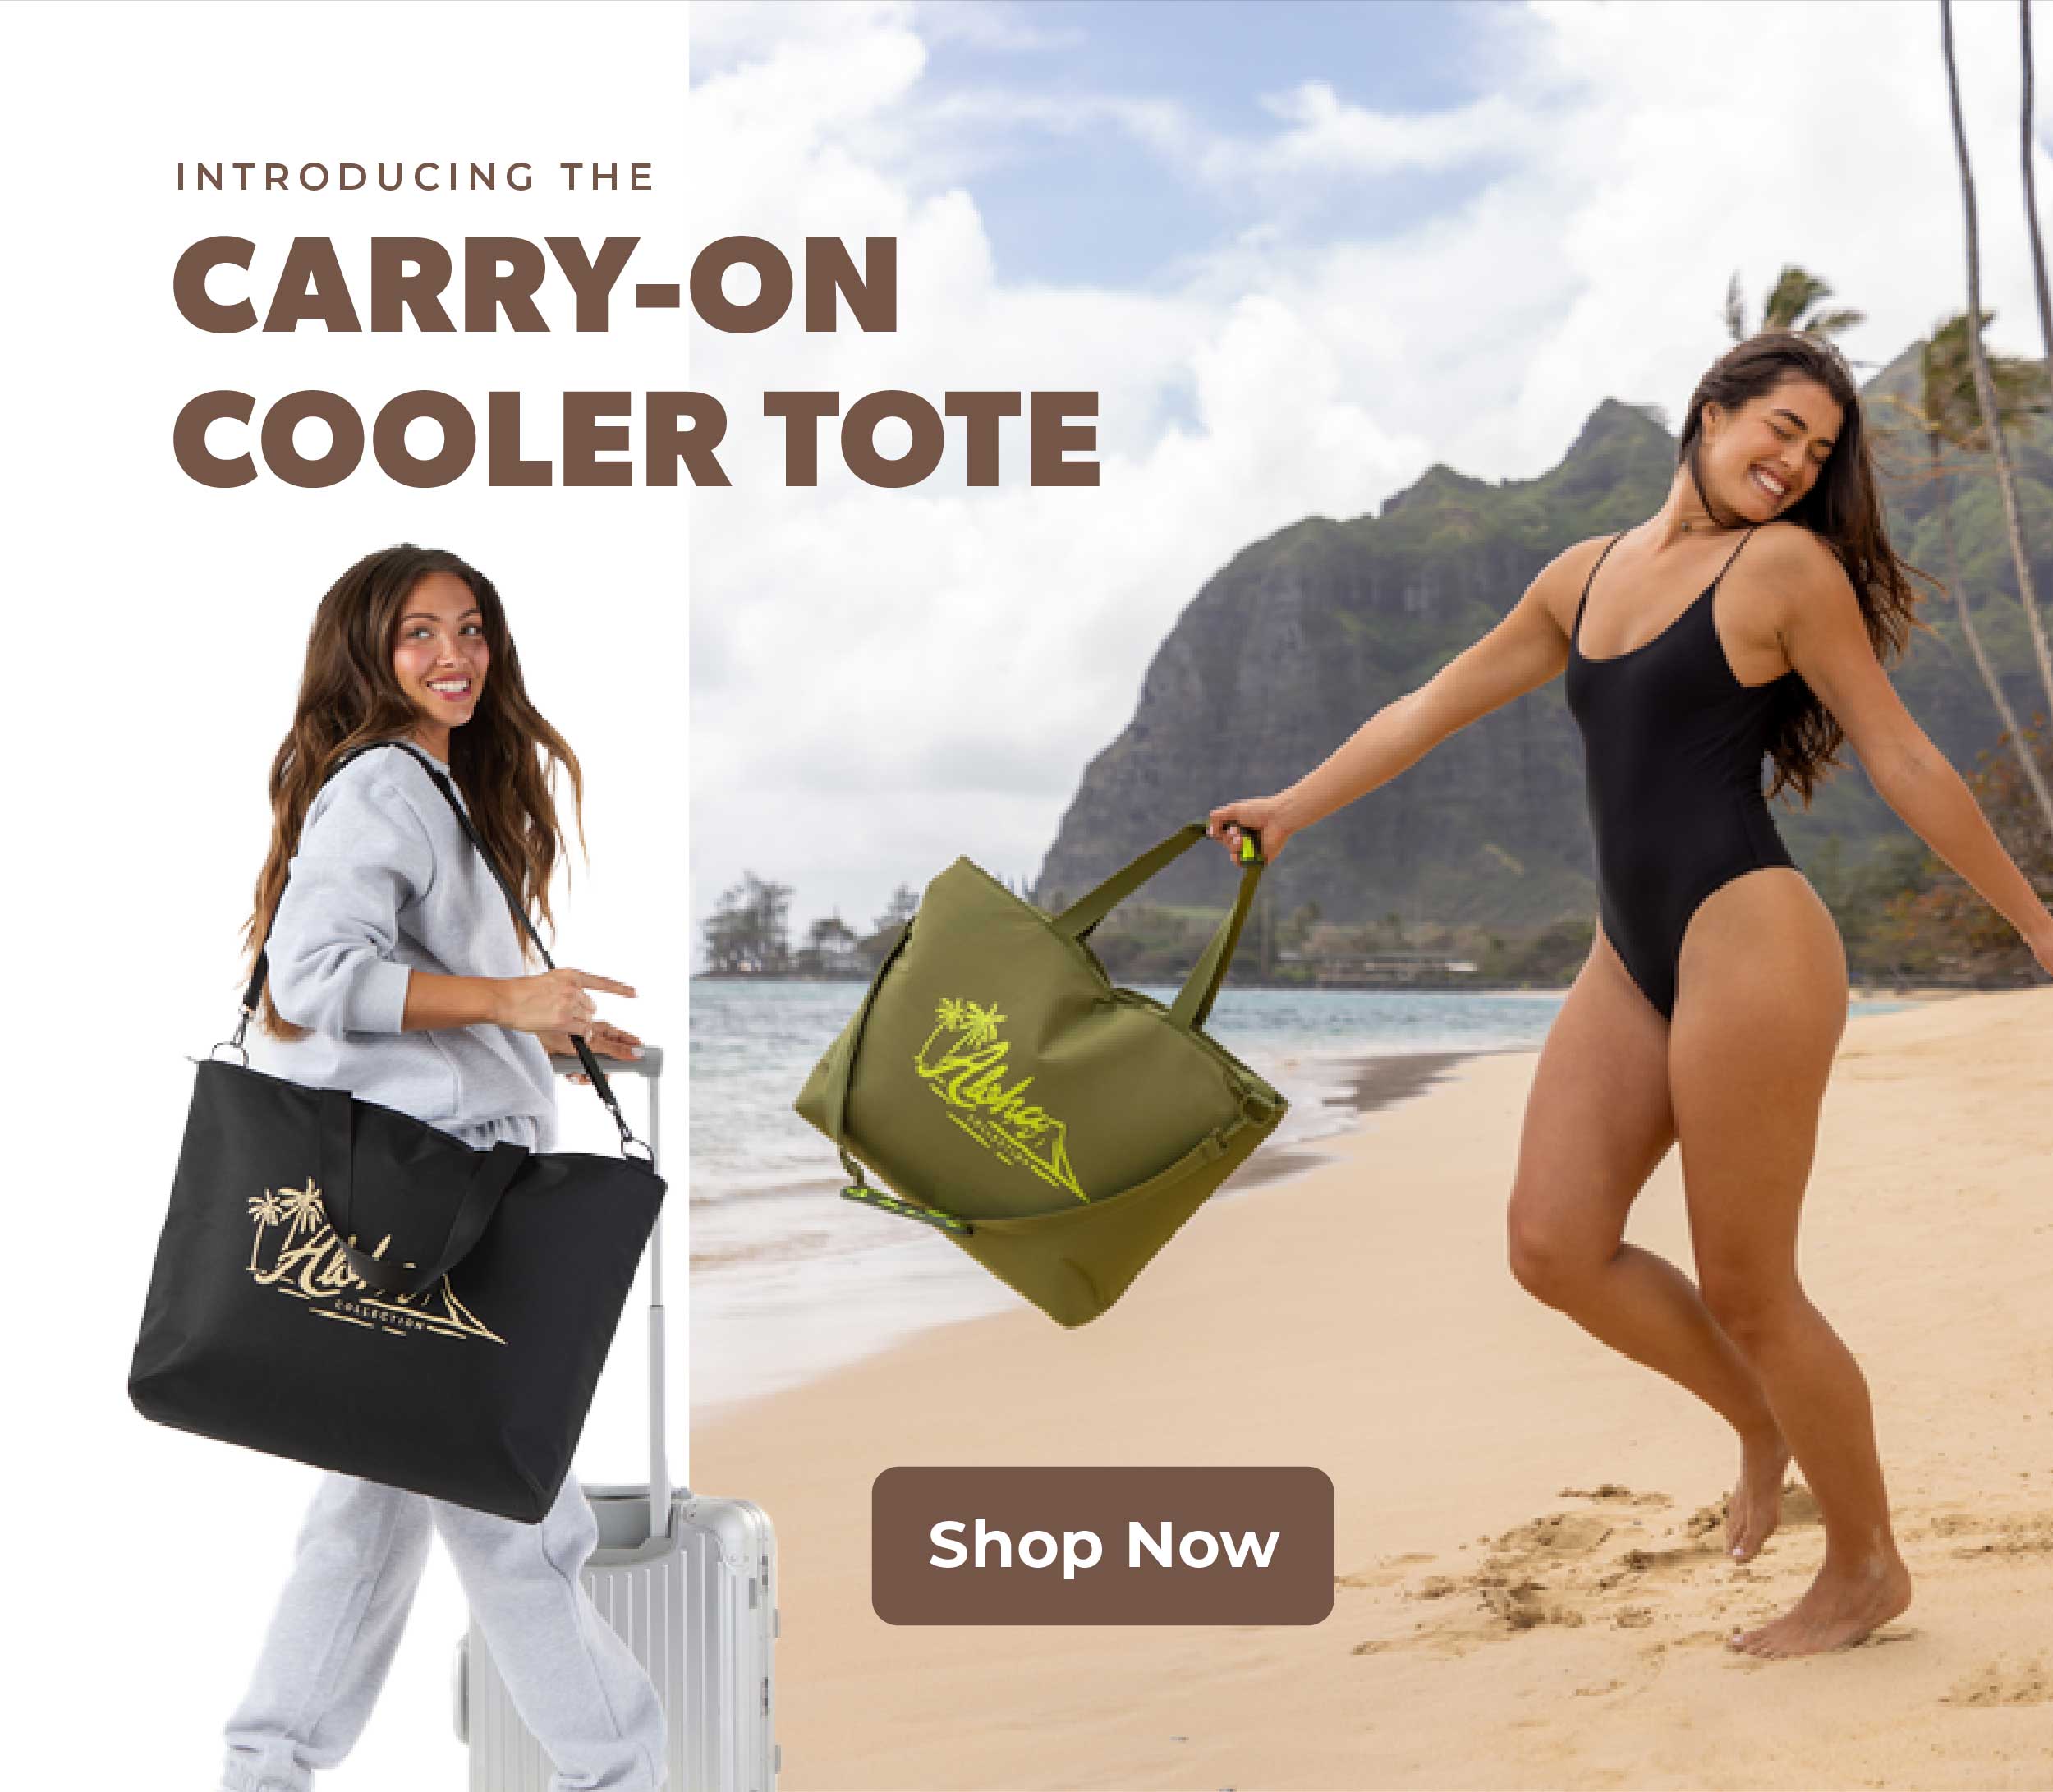 Introducing the Carry-On Cooler Tote, Shop Now